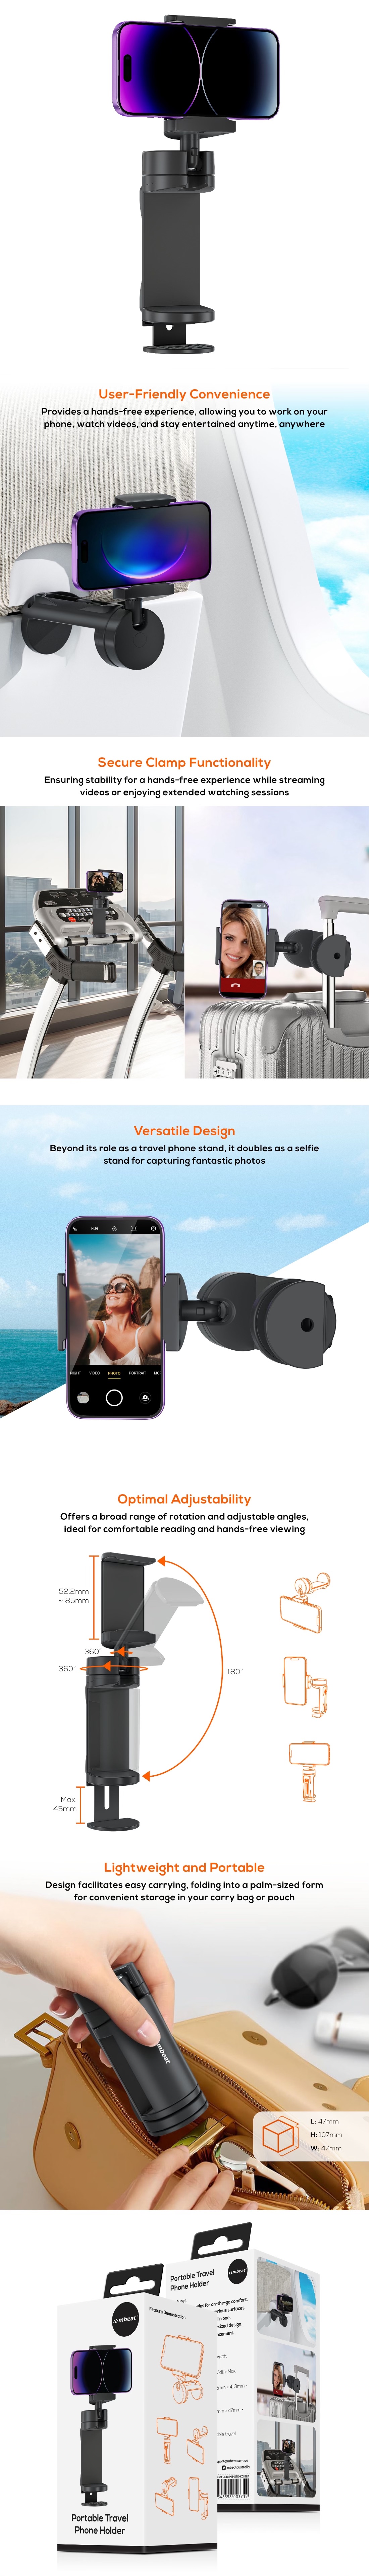 A large marketing image providing additional information about the product mBeat Portable Travel Phone Holder - Additional alt info not provided